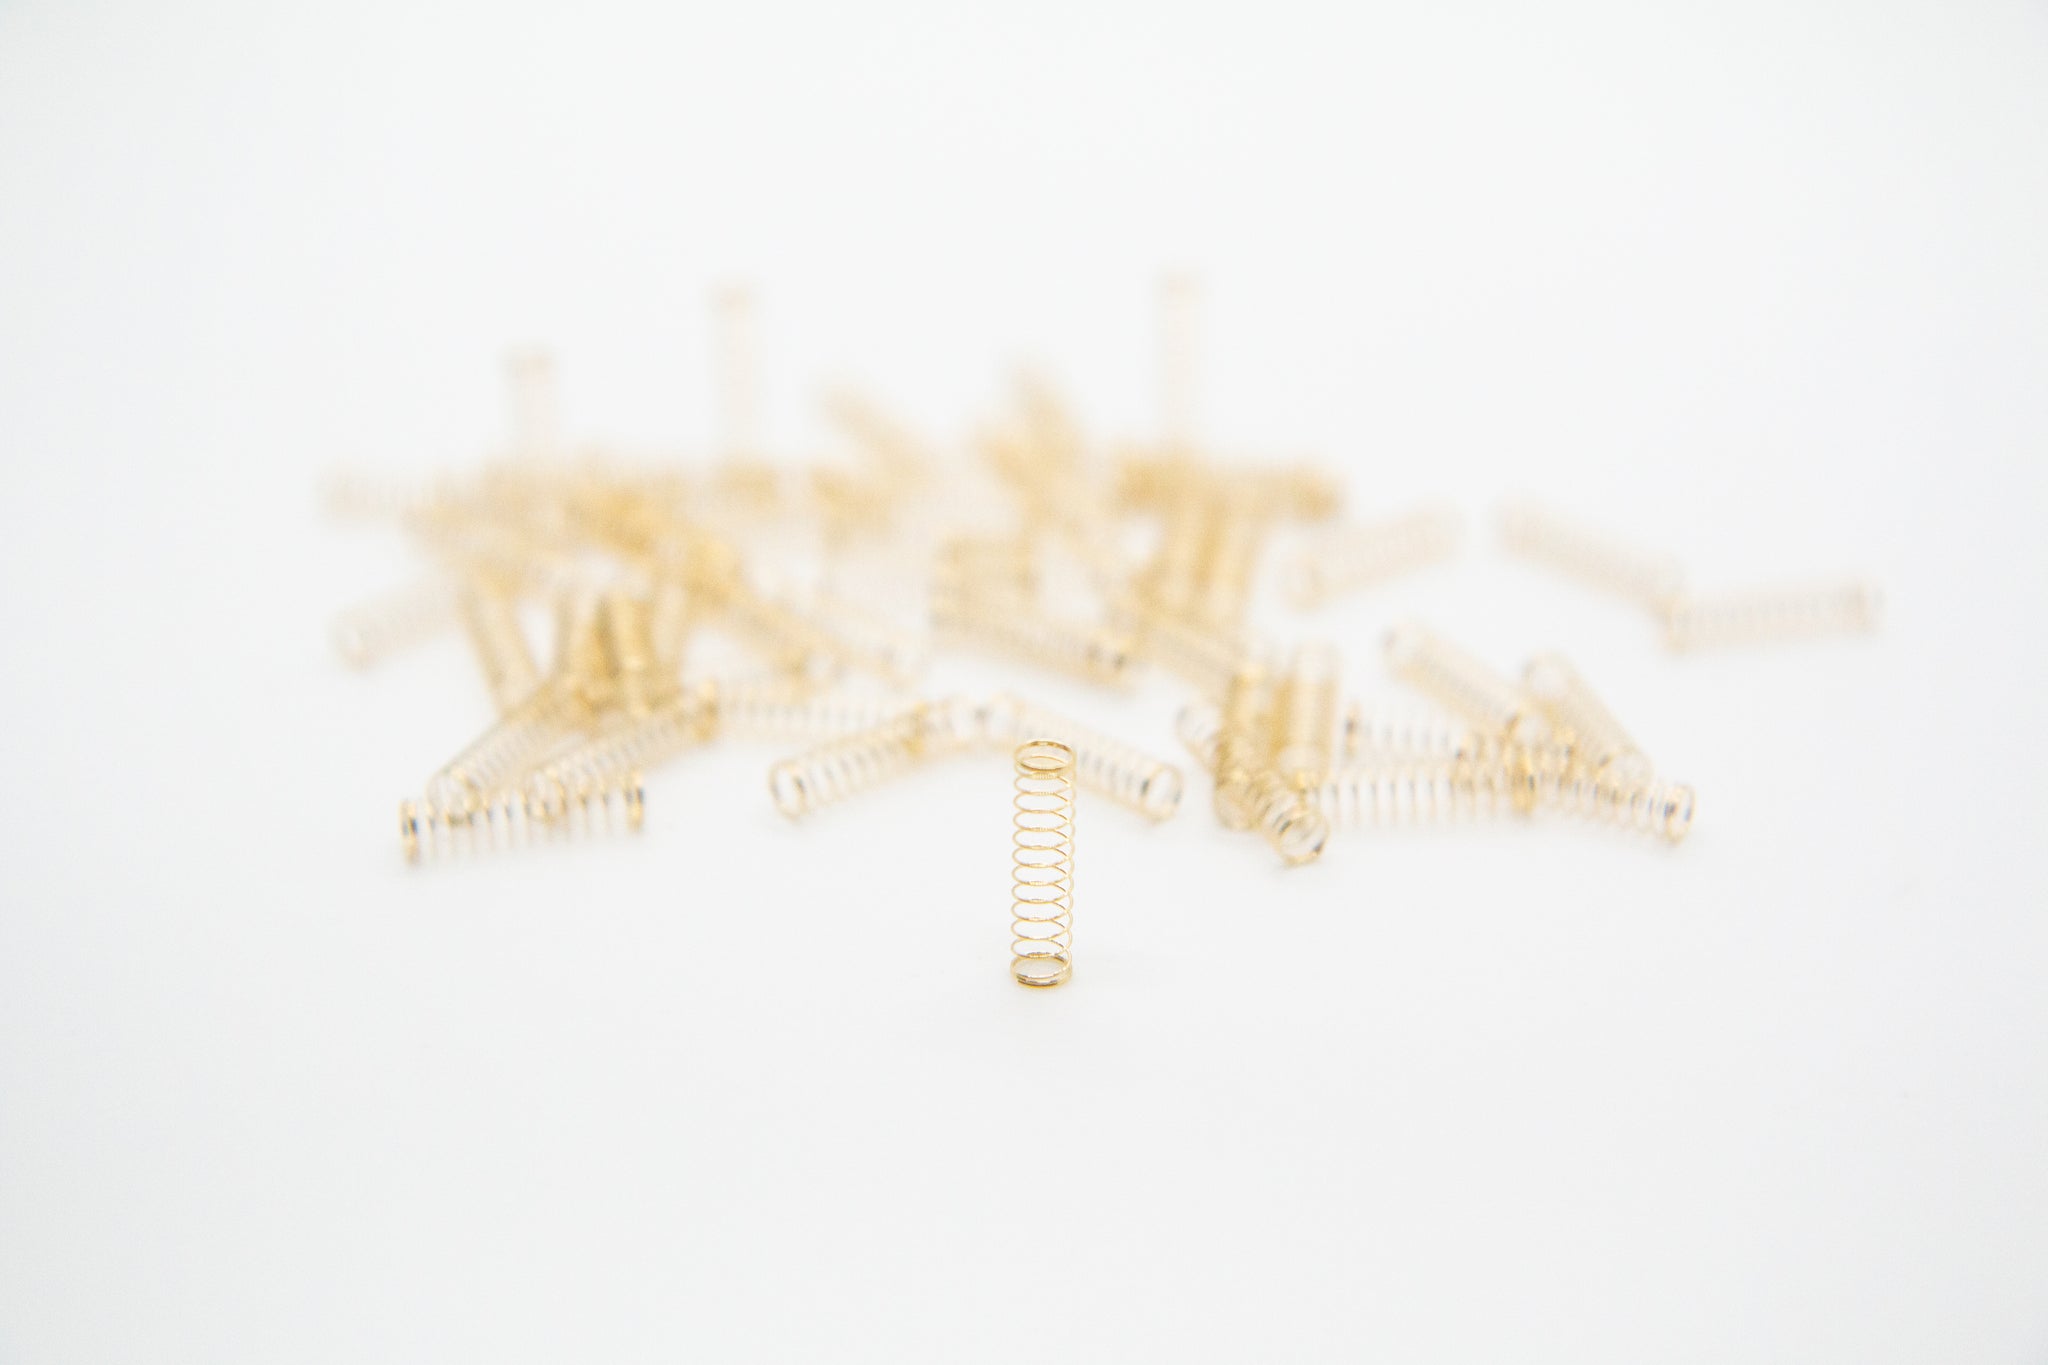 Durock Gold Plated Springs - 78g